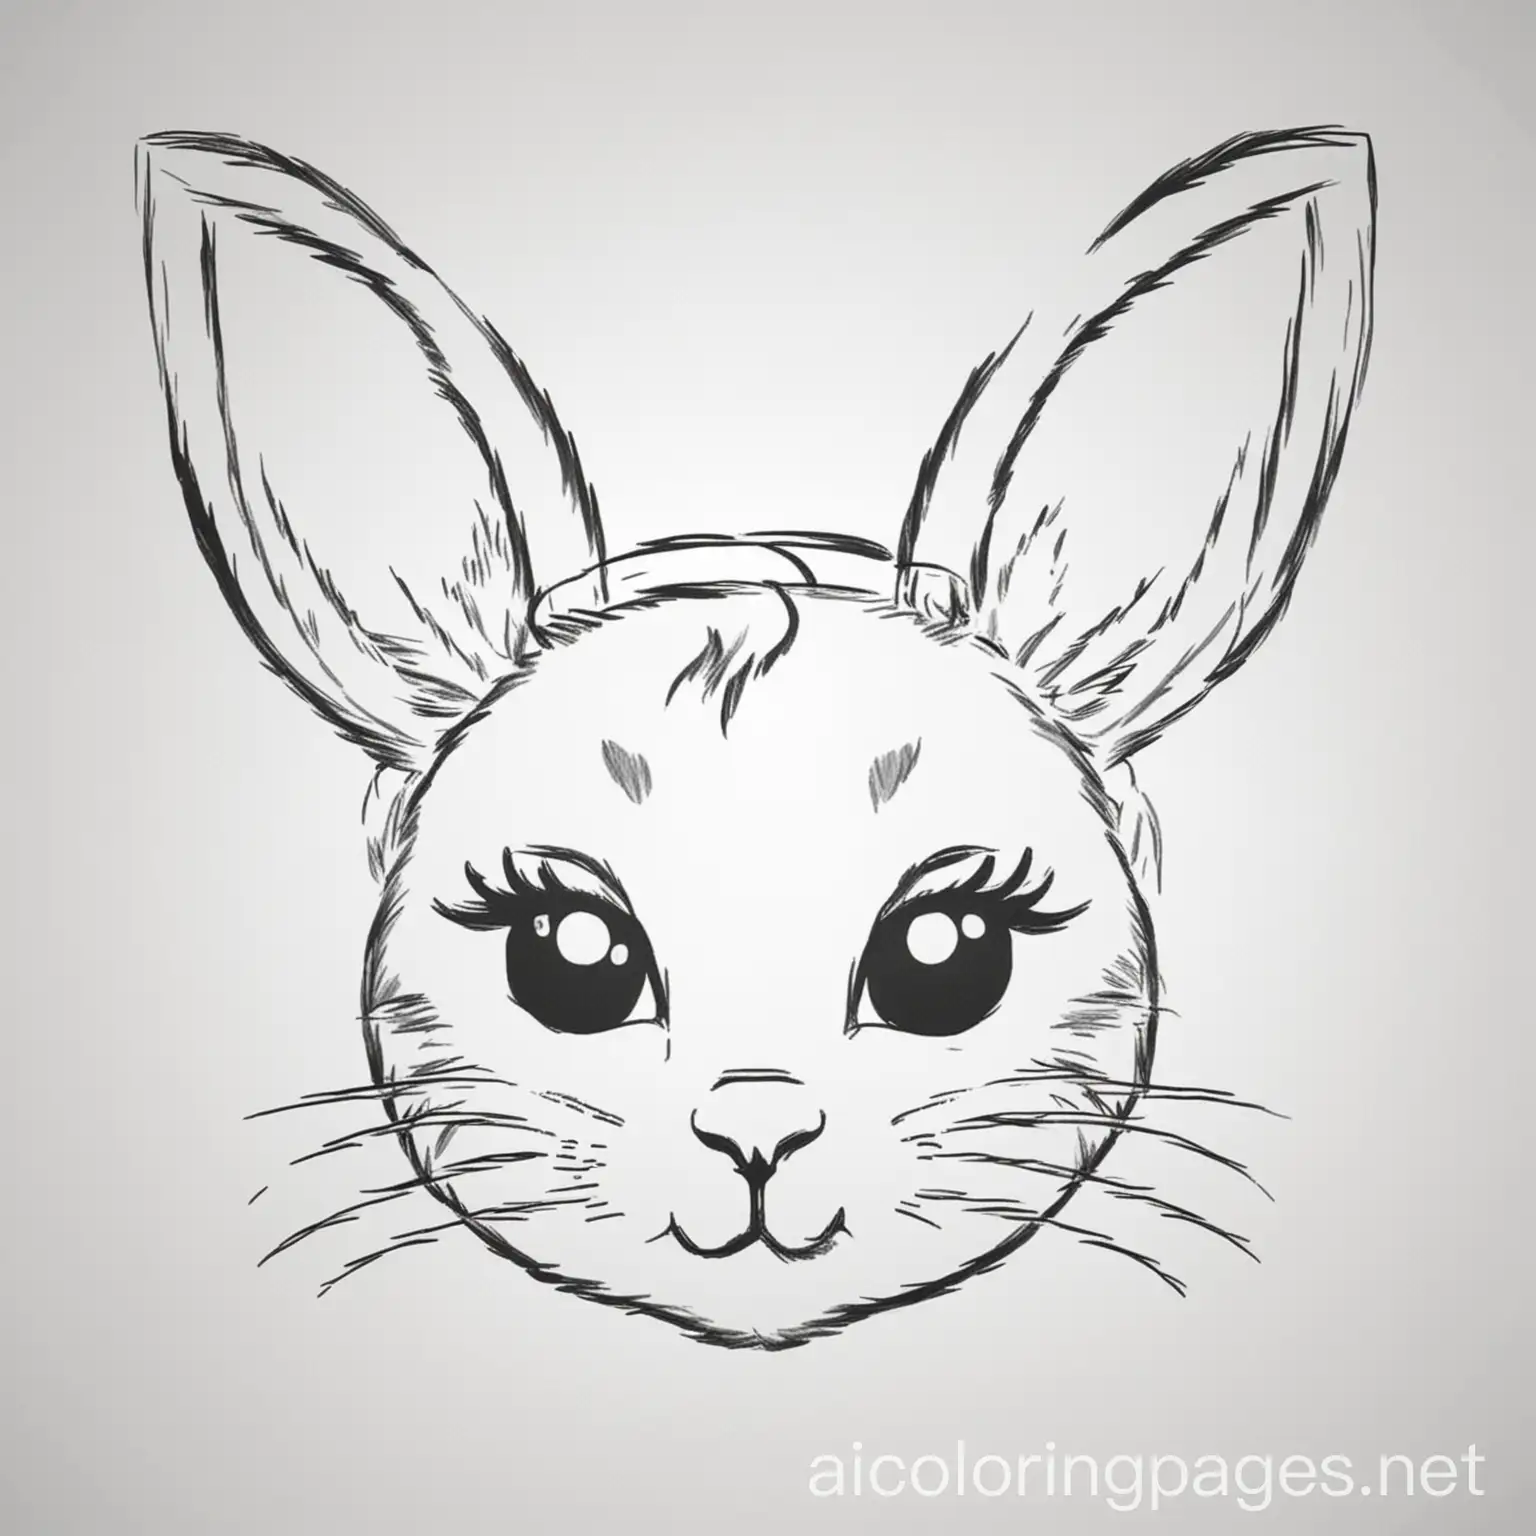 Cat head with rabbit ears, Coloring Page, Black and white, Line art, White background, Simplicity, Ample white space, The background of the coloring page is plain white to make it easy for young children to color within the lines. The outlines of all the subjects are easy to distinguish, making it simple for kids to color without too much difficulty.